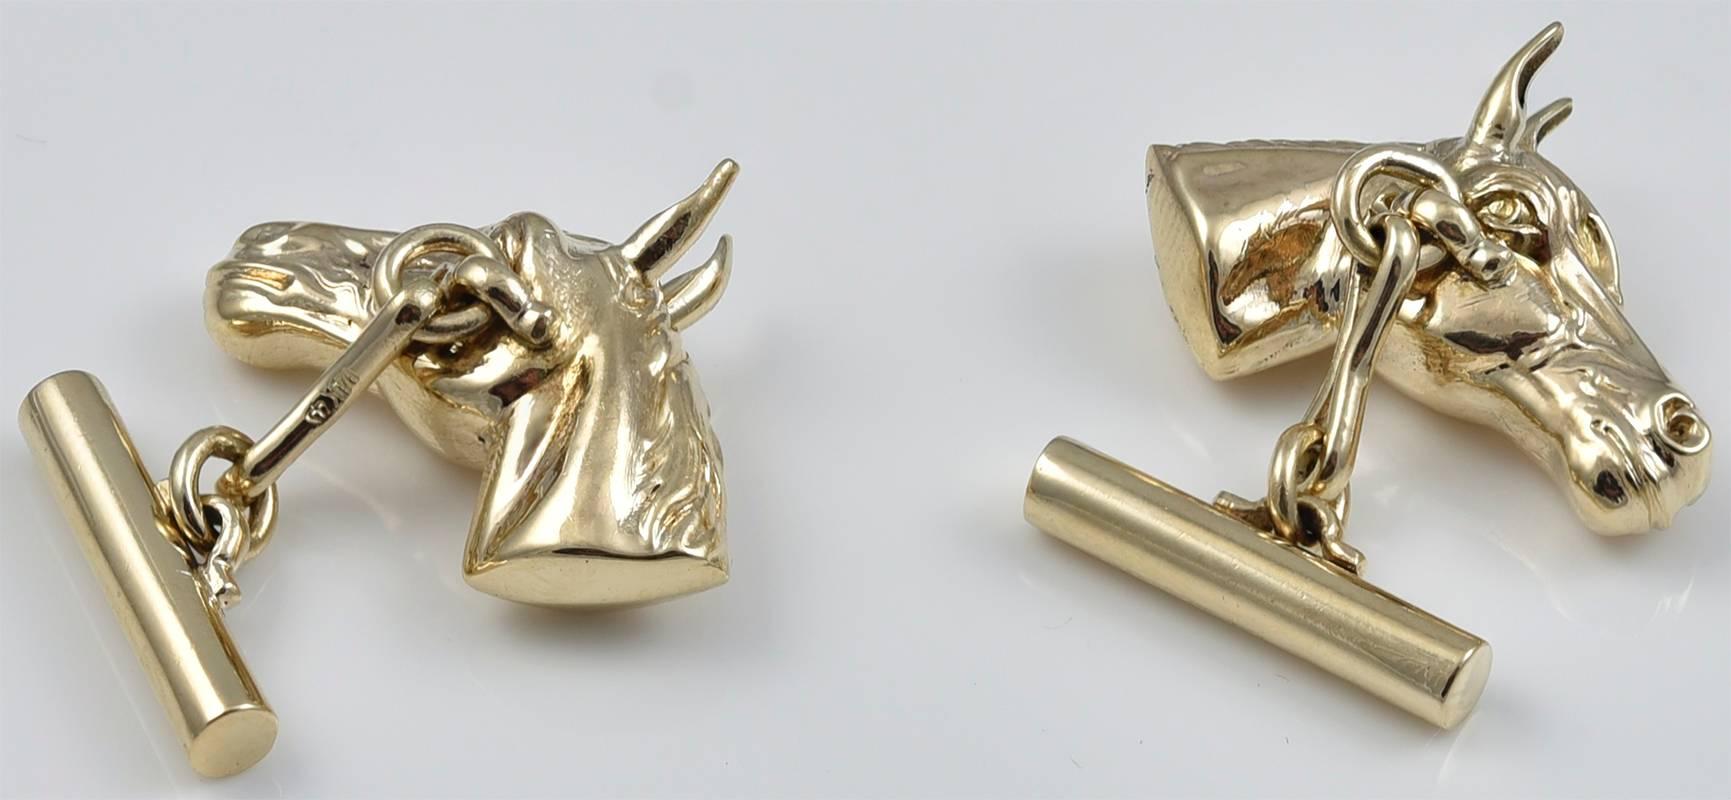 Realistic figural horse head cufflinks.  Well-rendered, with perky ears. Cabochon ruby eyes.  1